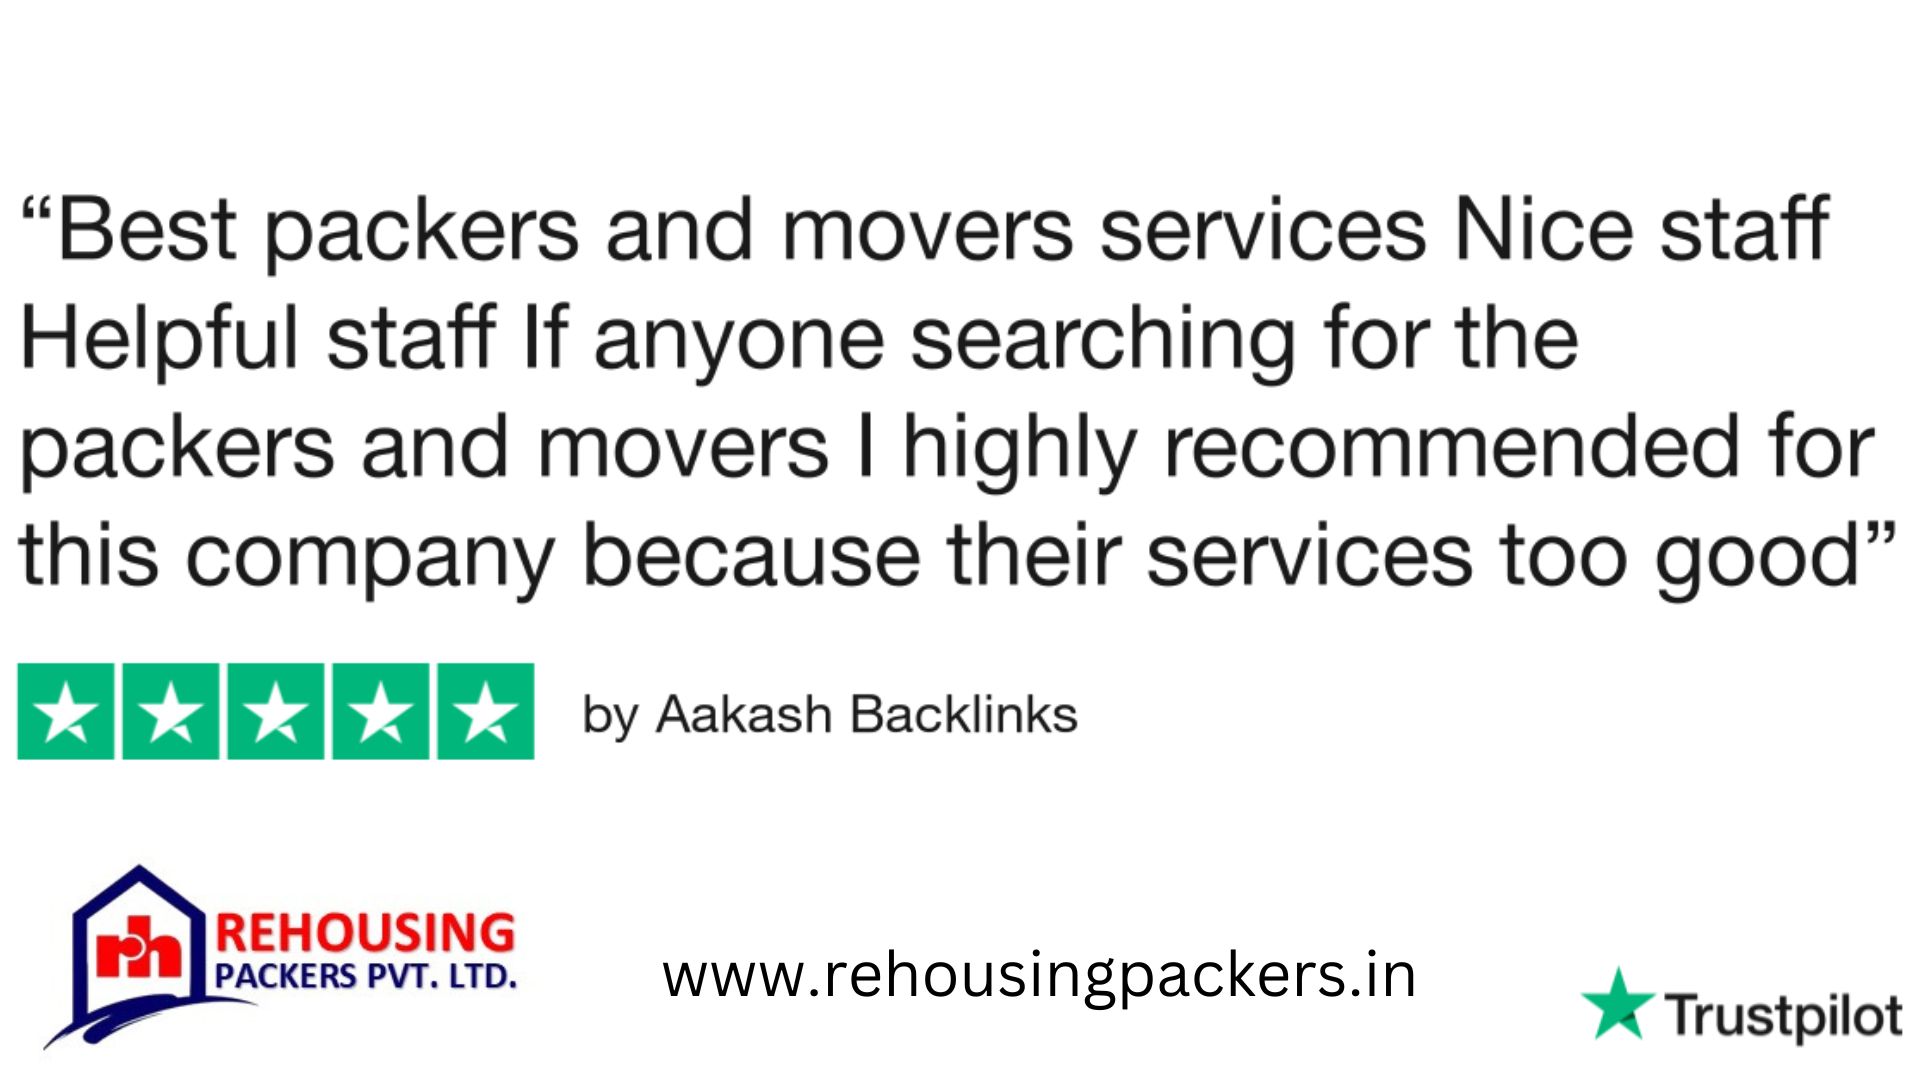 Rehousing packers and movers reviews trustpilot 7